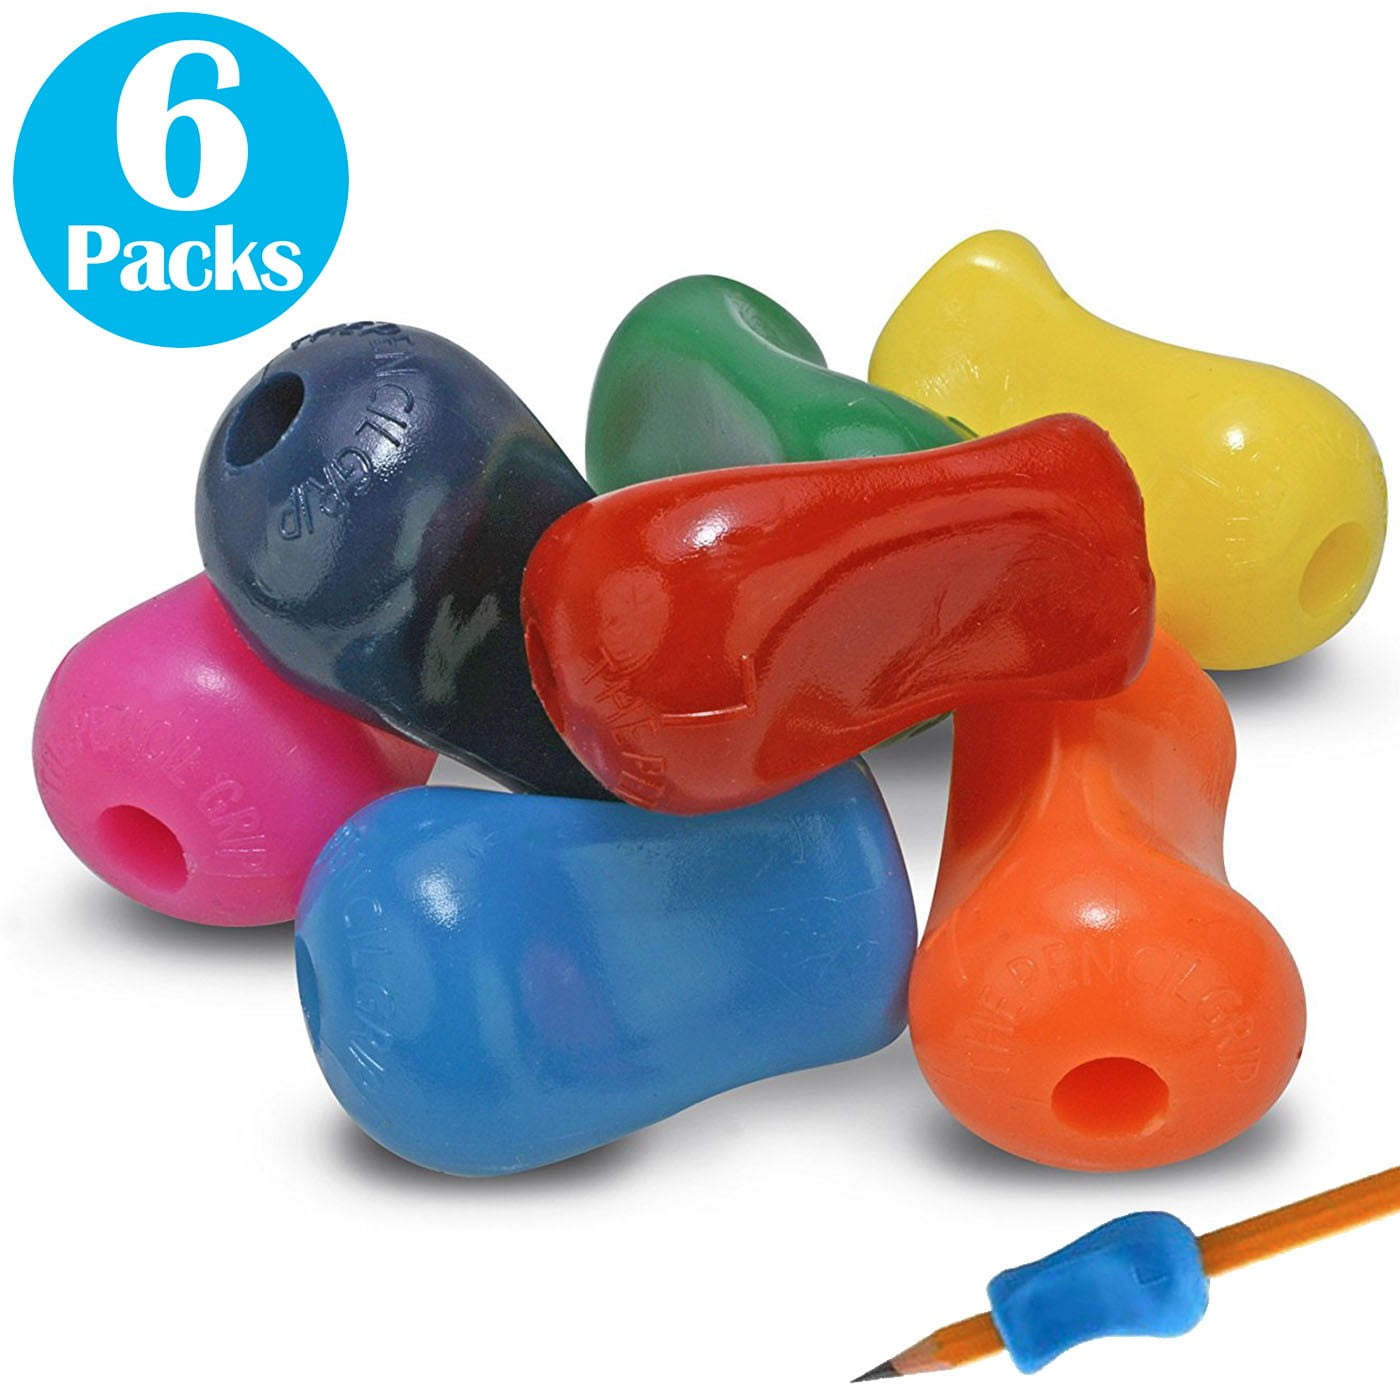 6 x Pearlized Sticky Pencil Grips Writing Aids Teacher Resource for Students 